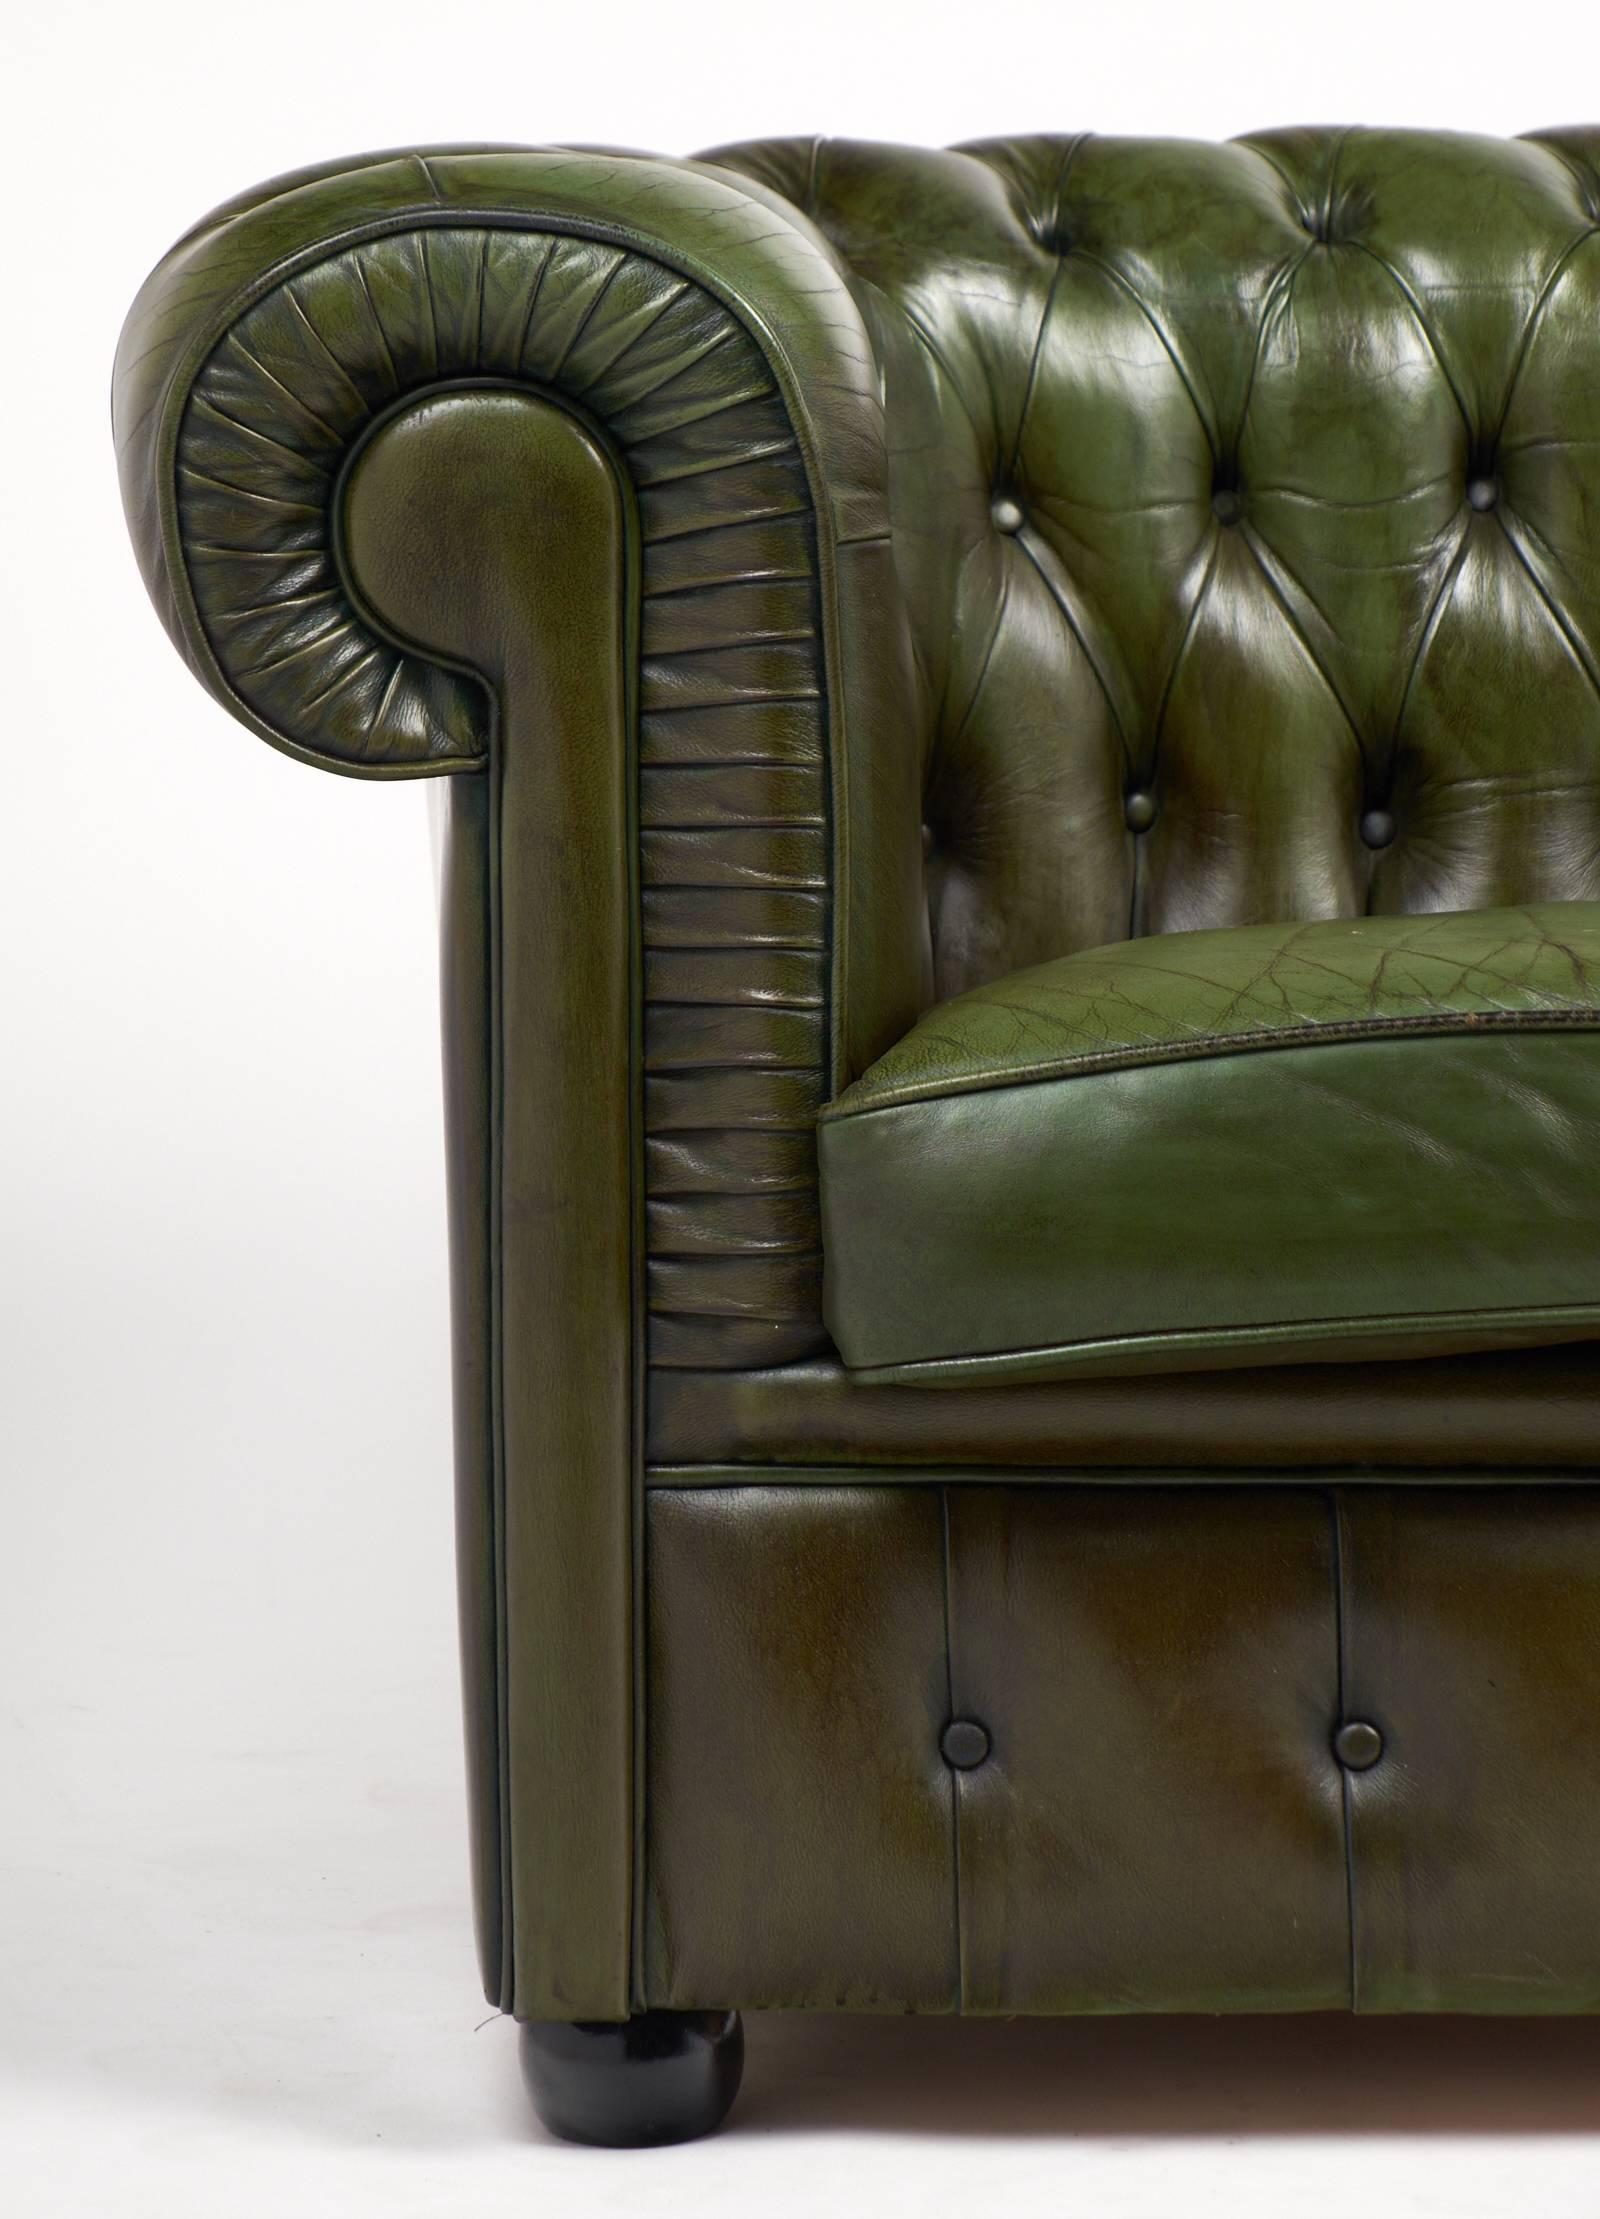 English Vintage Green or Bronze Chesterfield Sofa 1